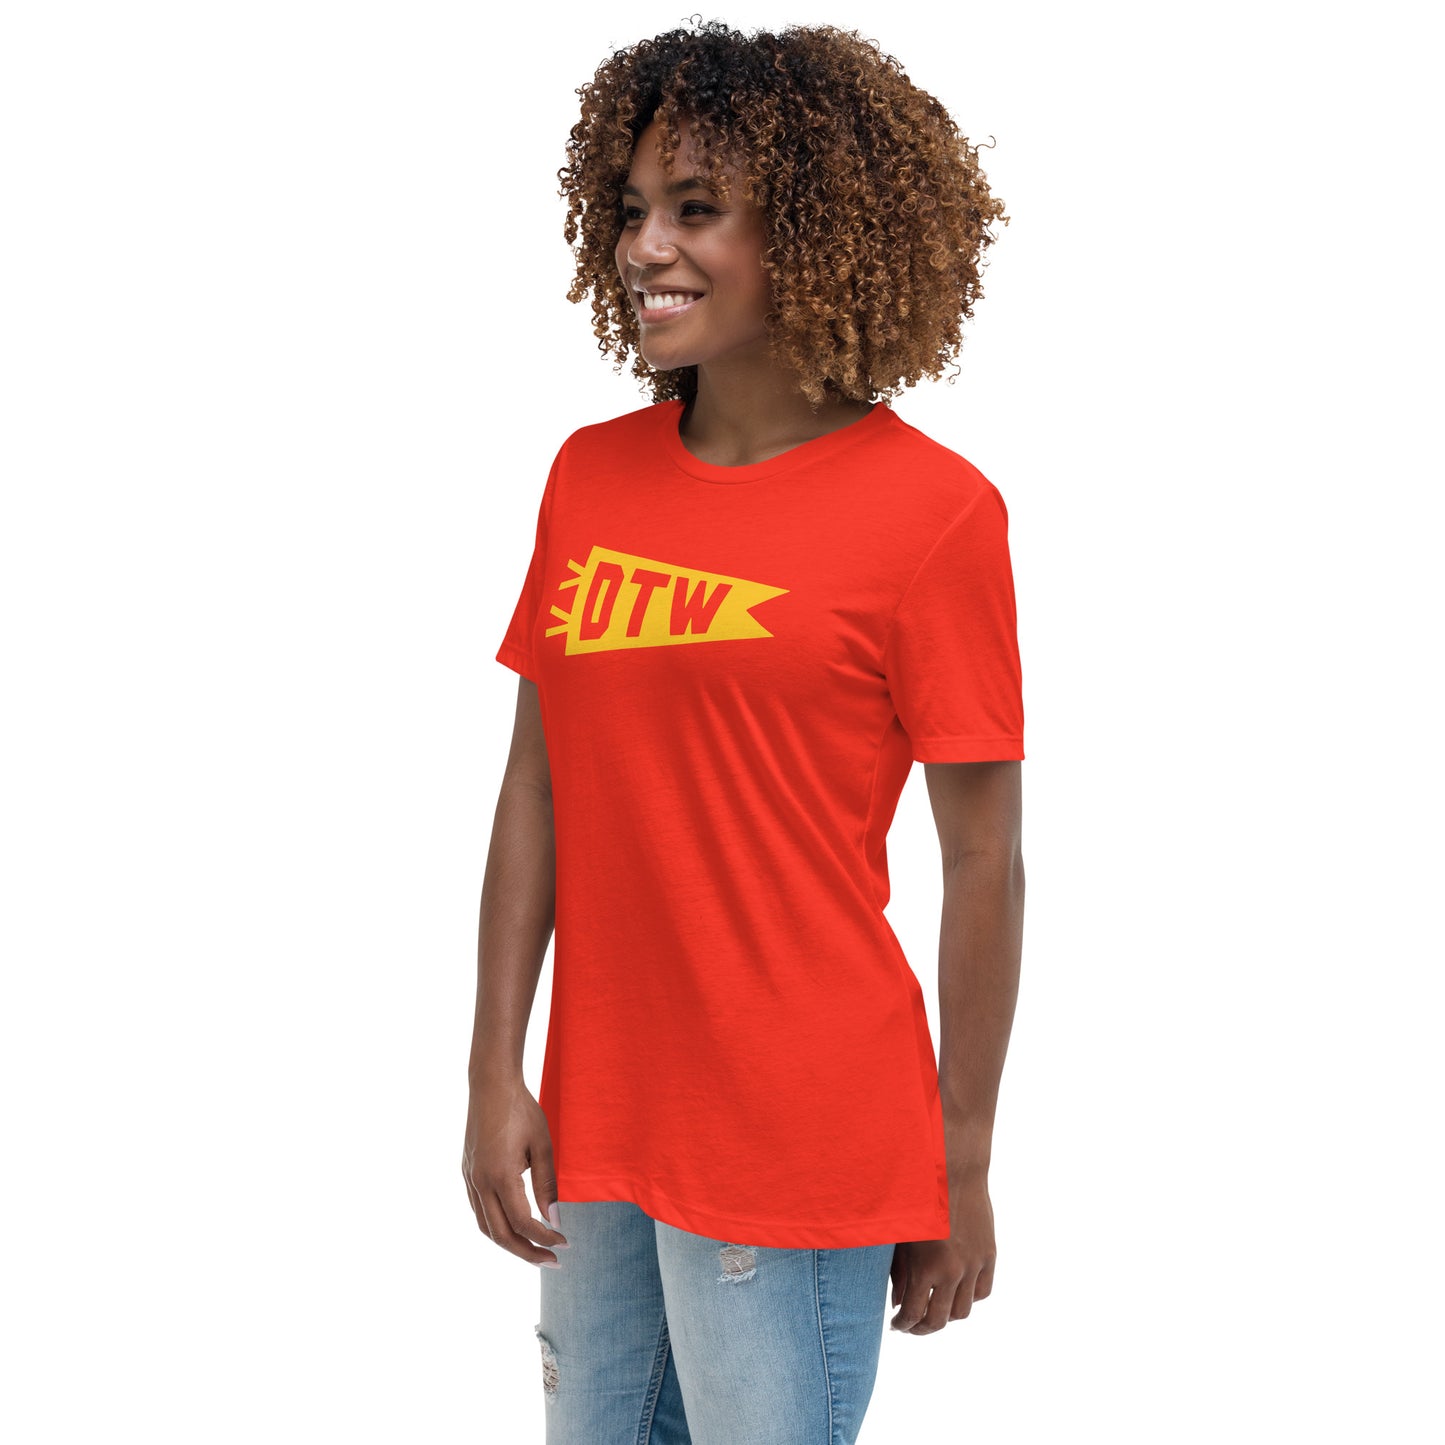 Airport Code Women's Tee - Yellow Graphic • DTW Detroit • YHM Designs - Image 04